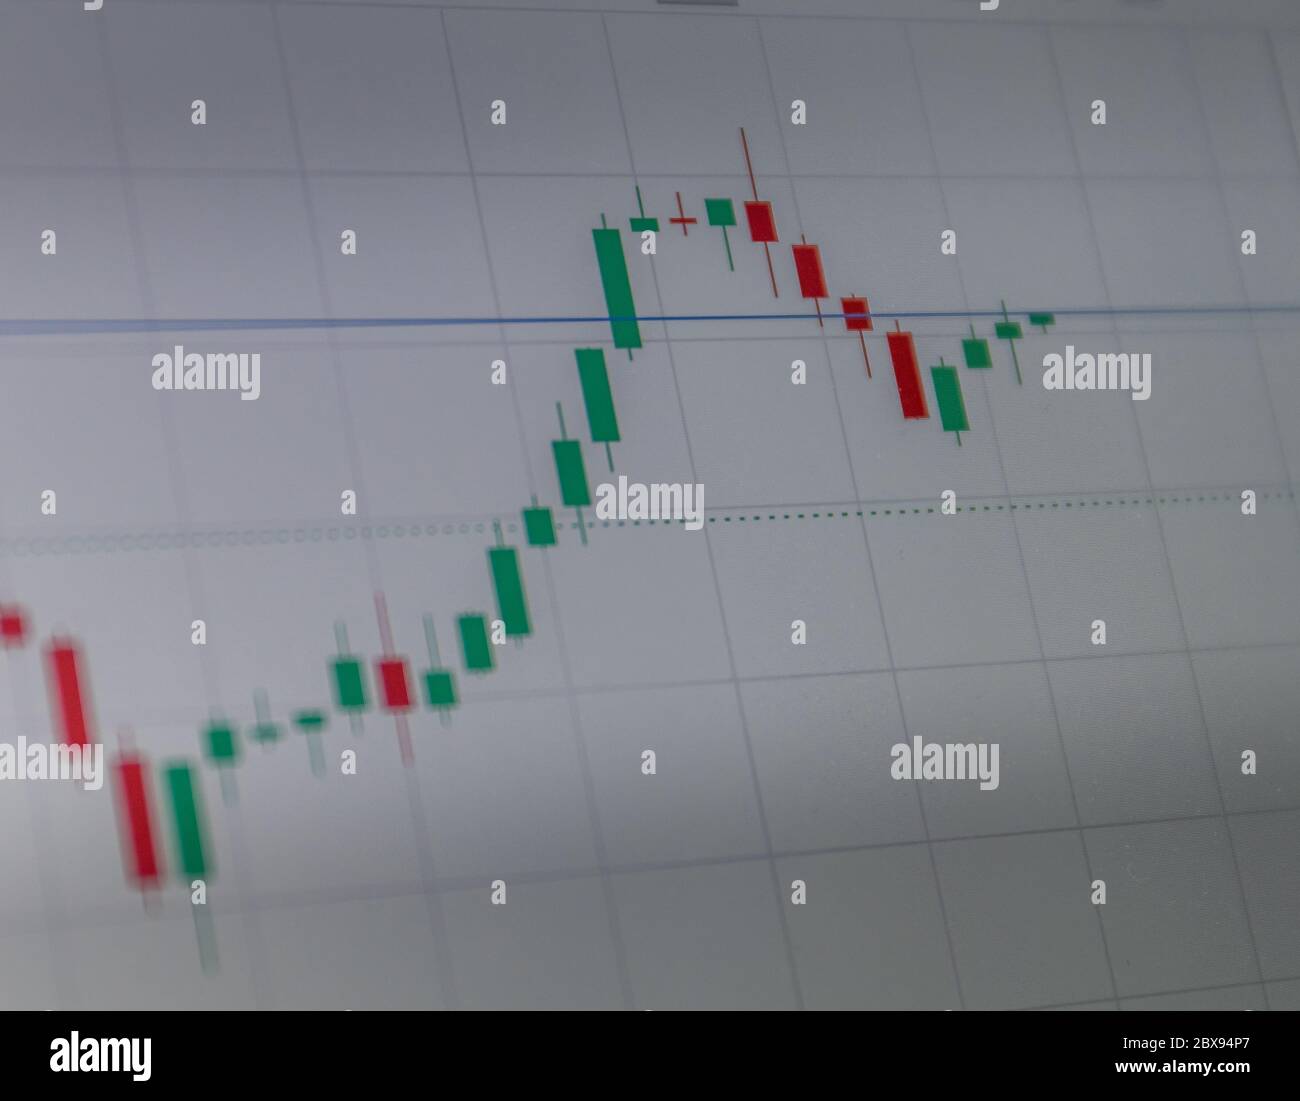 Candelstick Graph Showing Stocks Going Up And Down On A Computer Screen Stock Photo Alamy